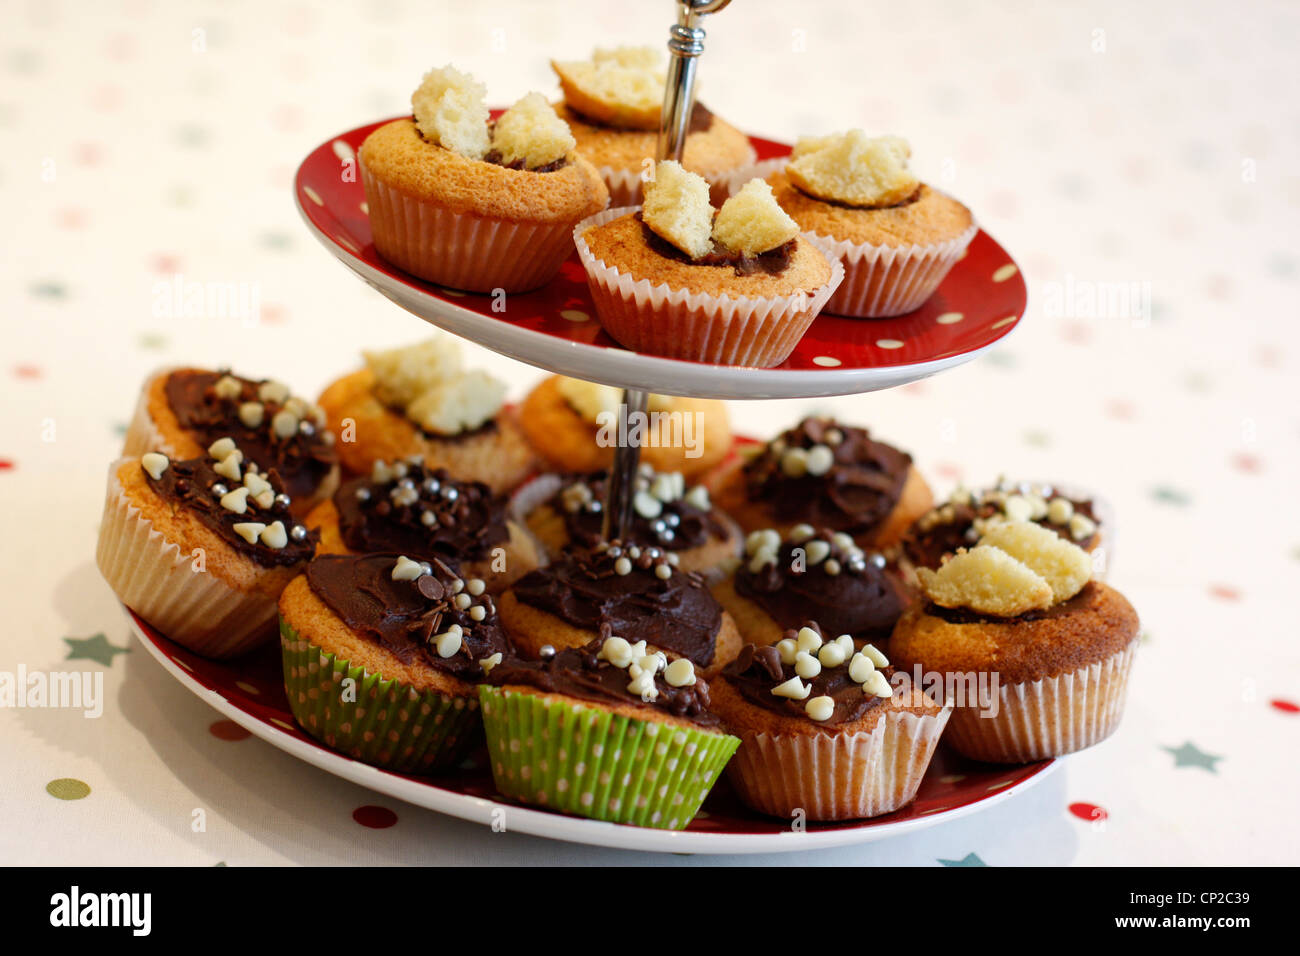 Home made cup cakes on a cake stand Stock Photo